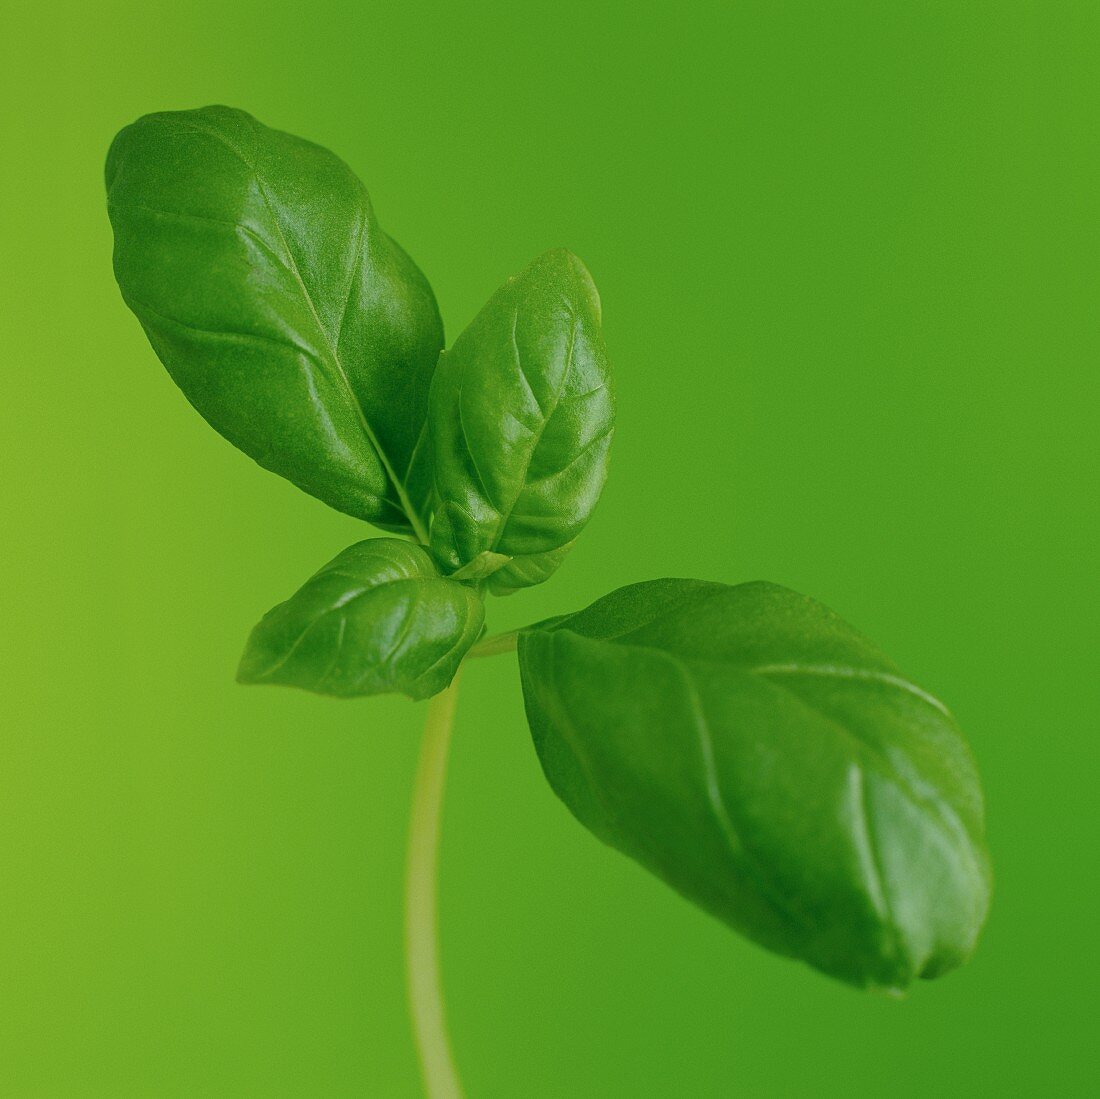 Basil in front of a green background